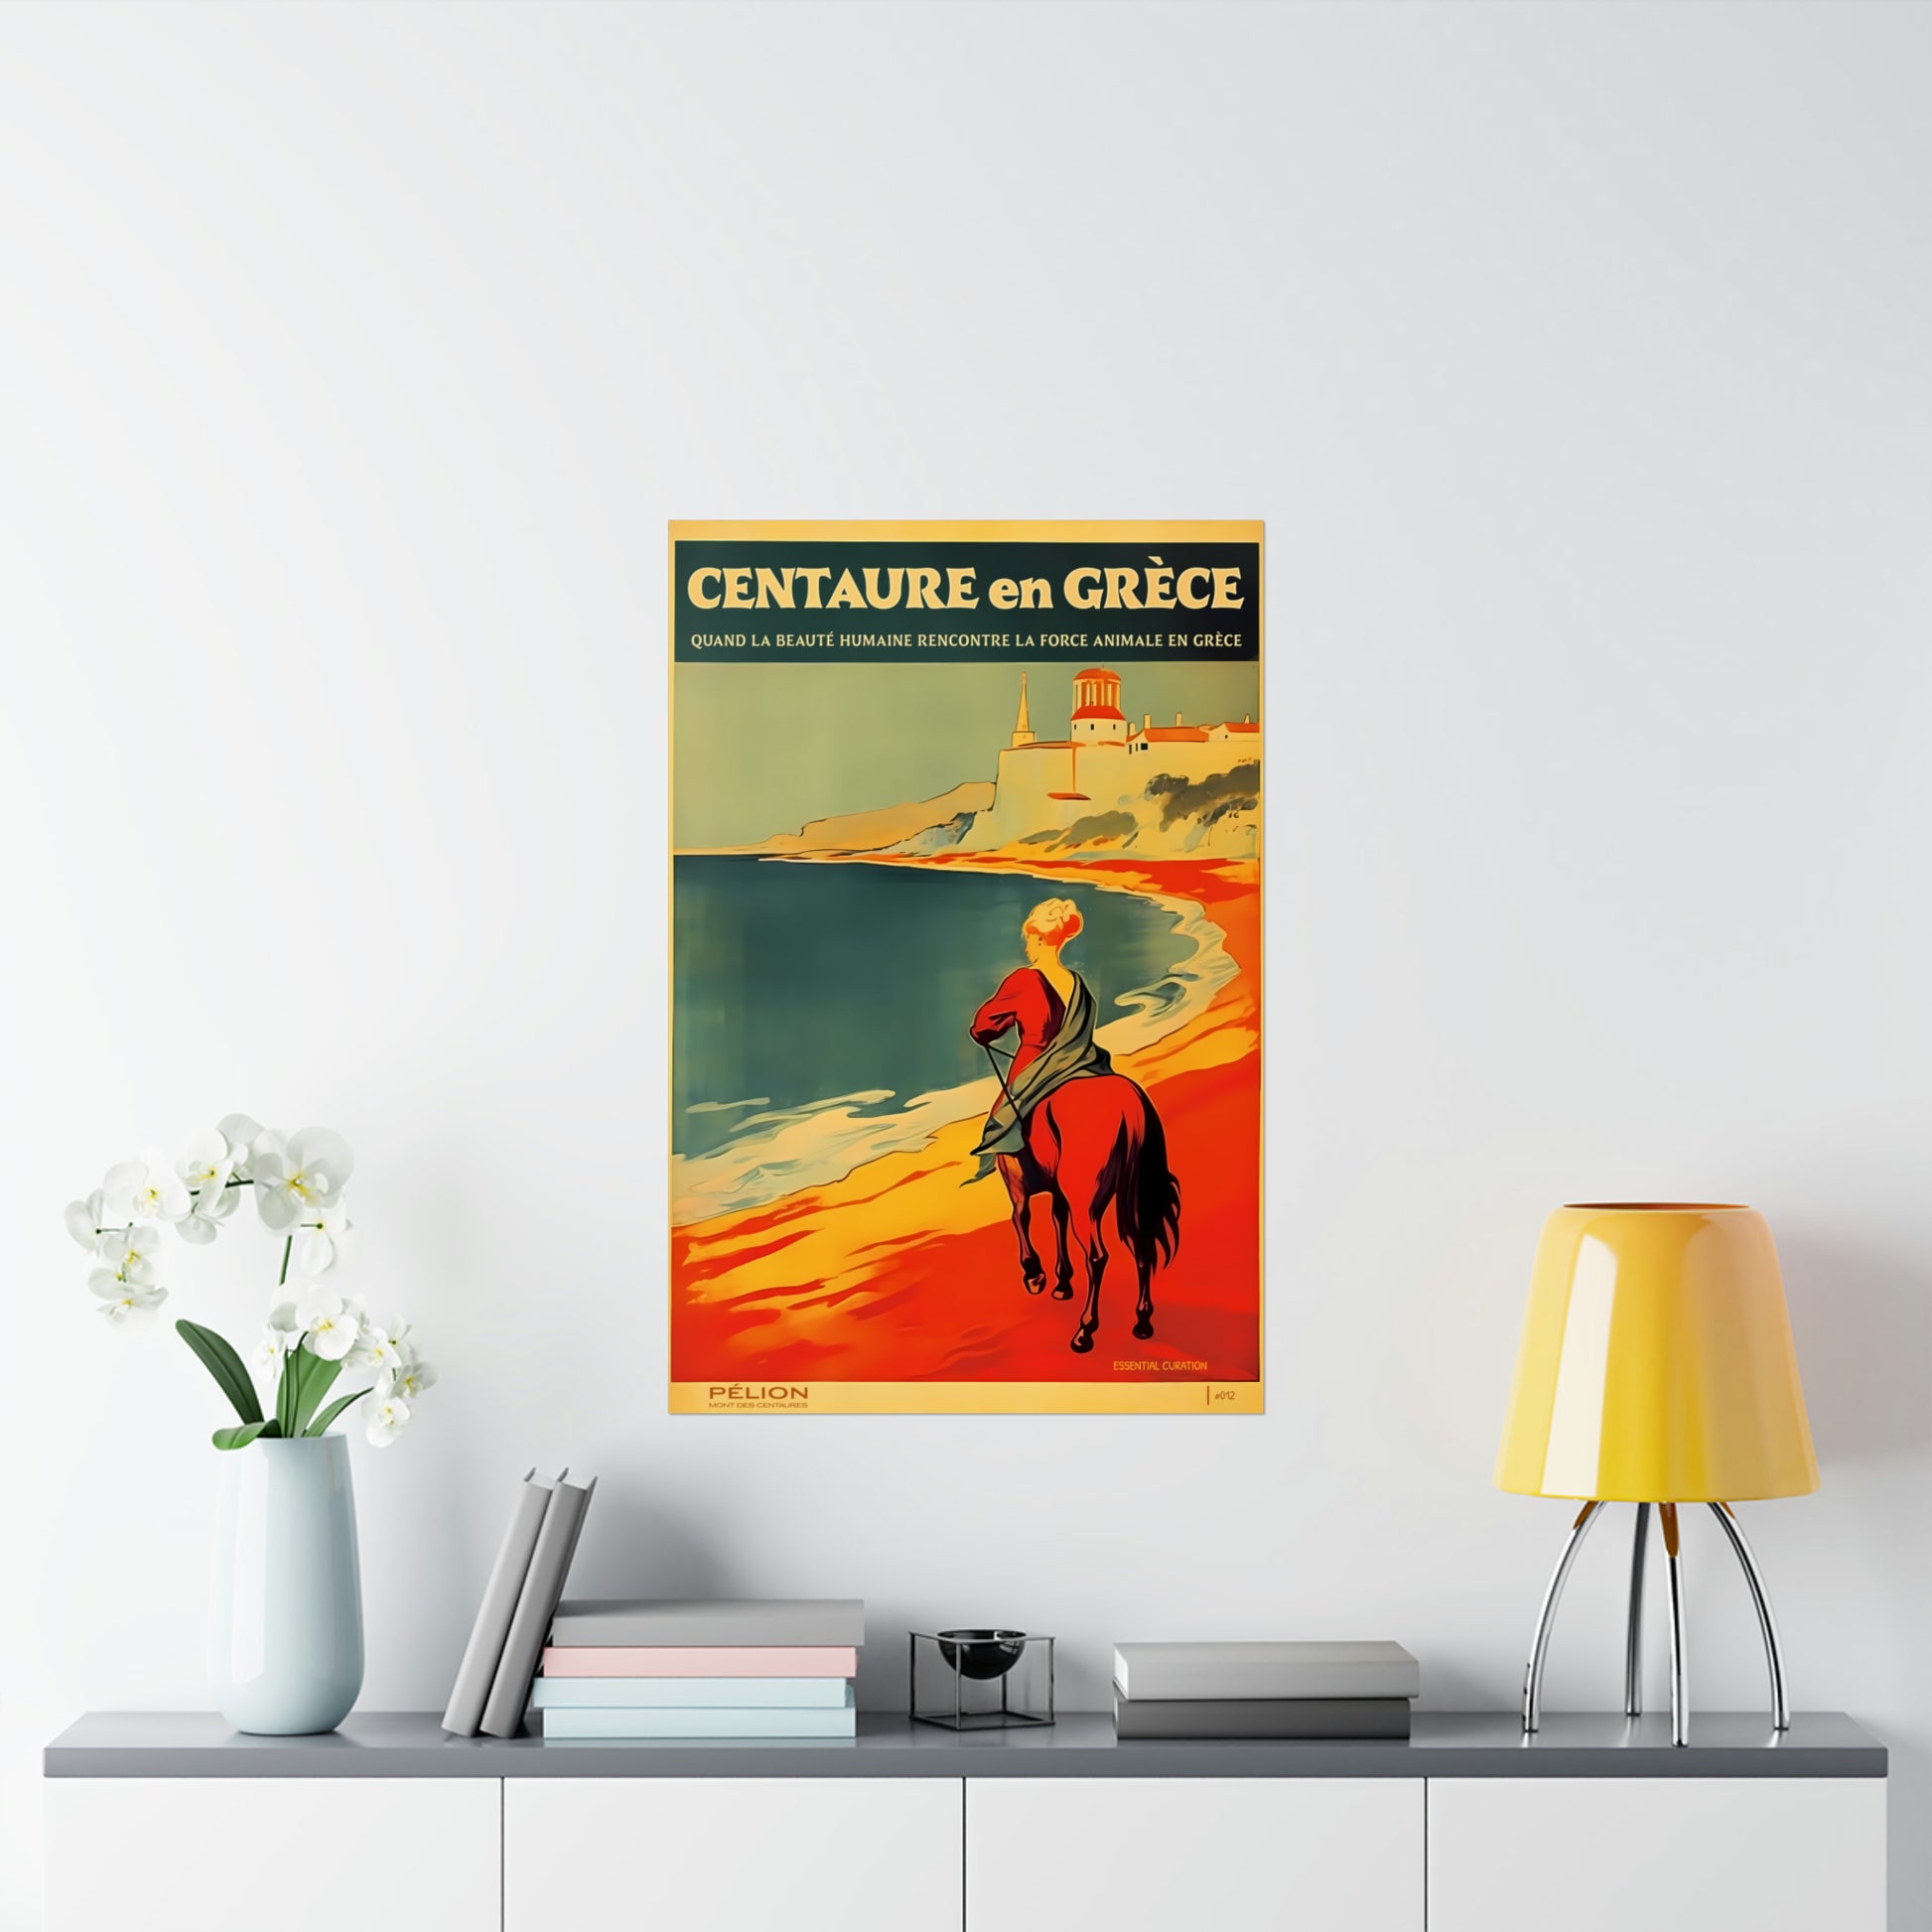 Color Retro Poster Wall Art from Greece by George Tatakis | Centaur in Pelion by the sea - large size